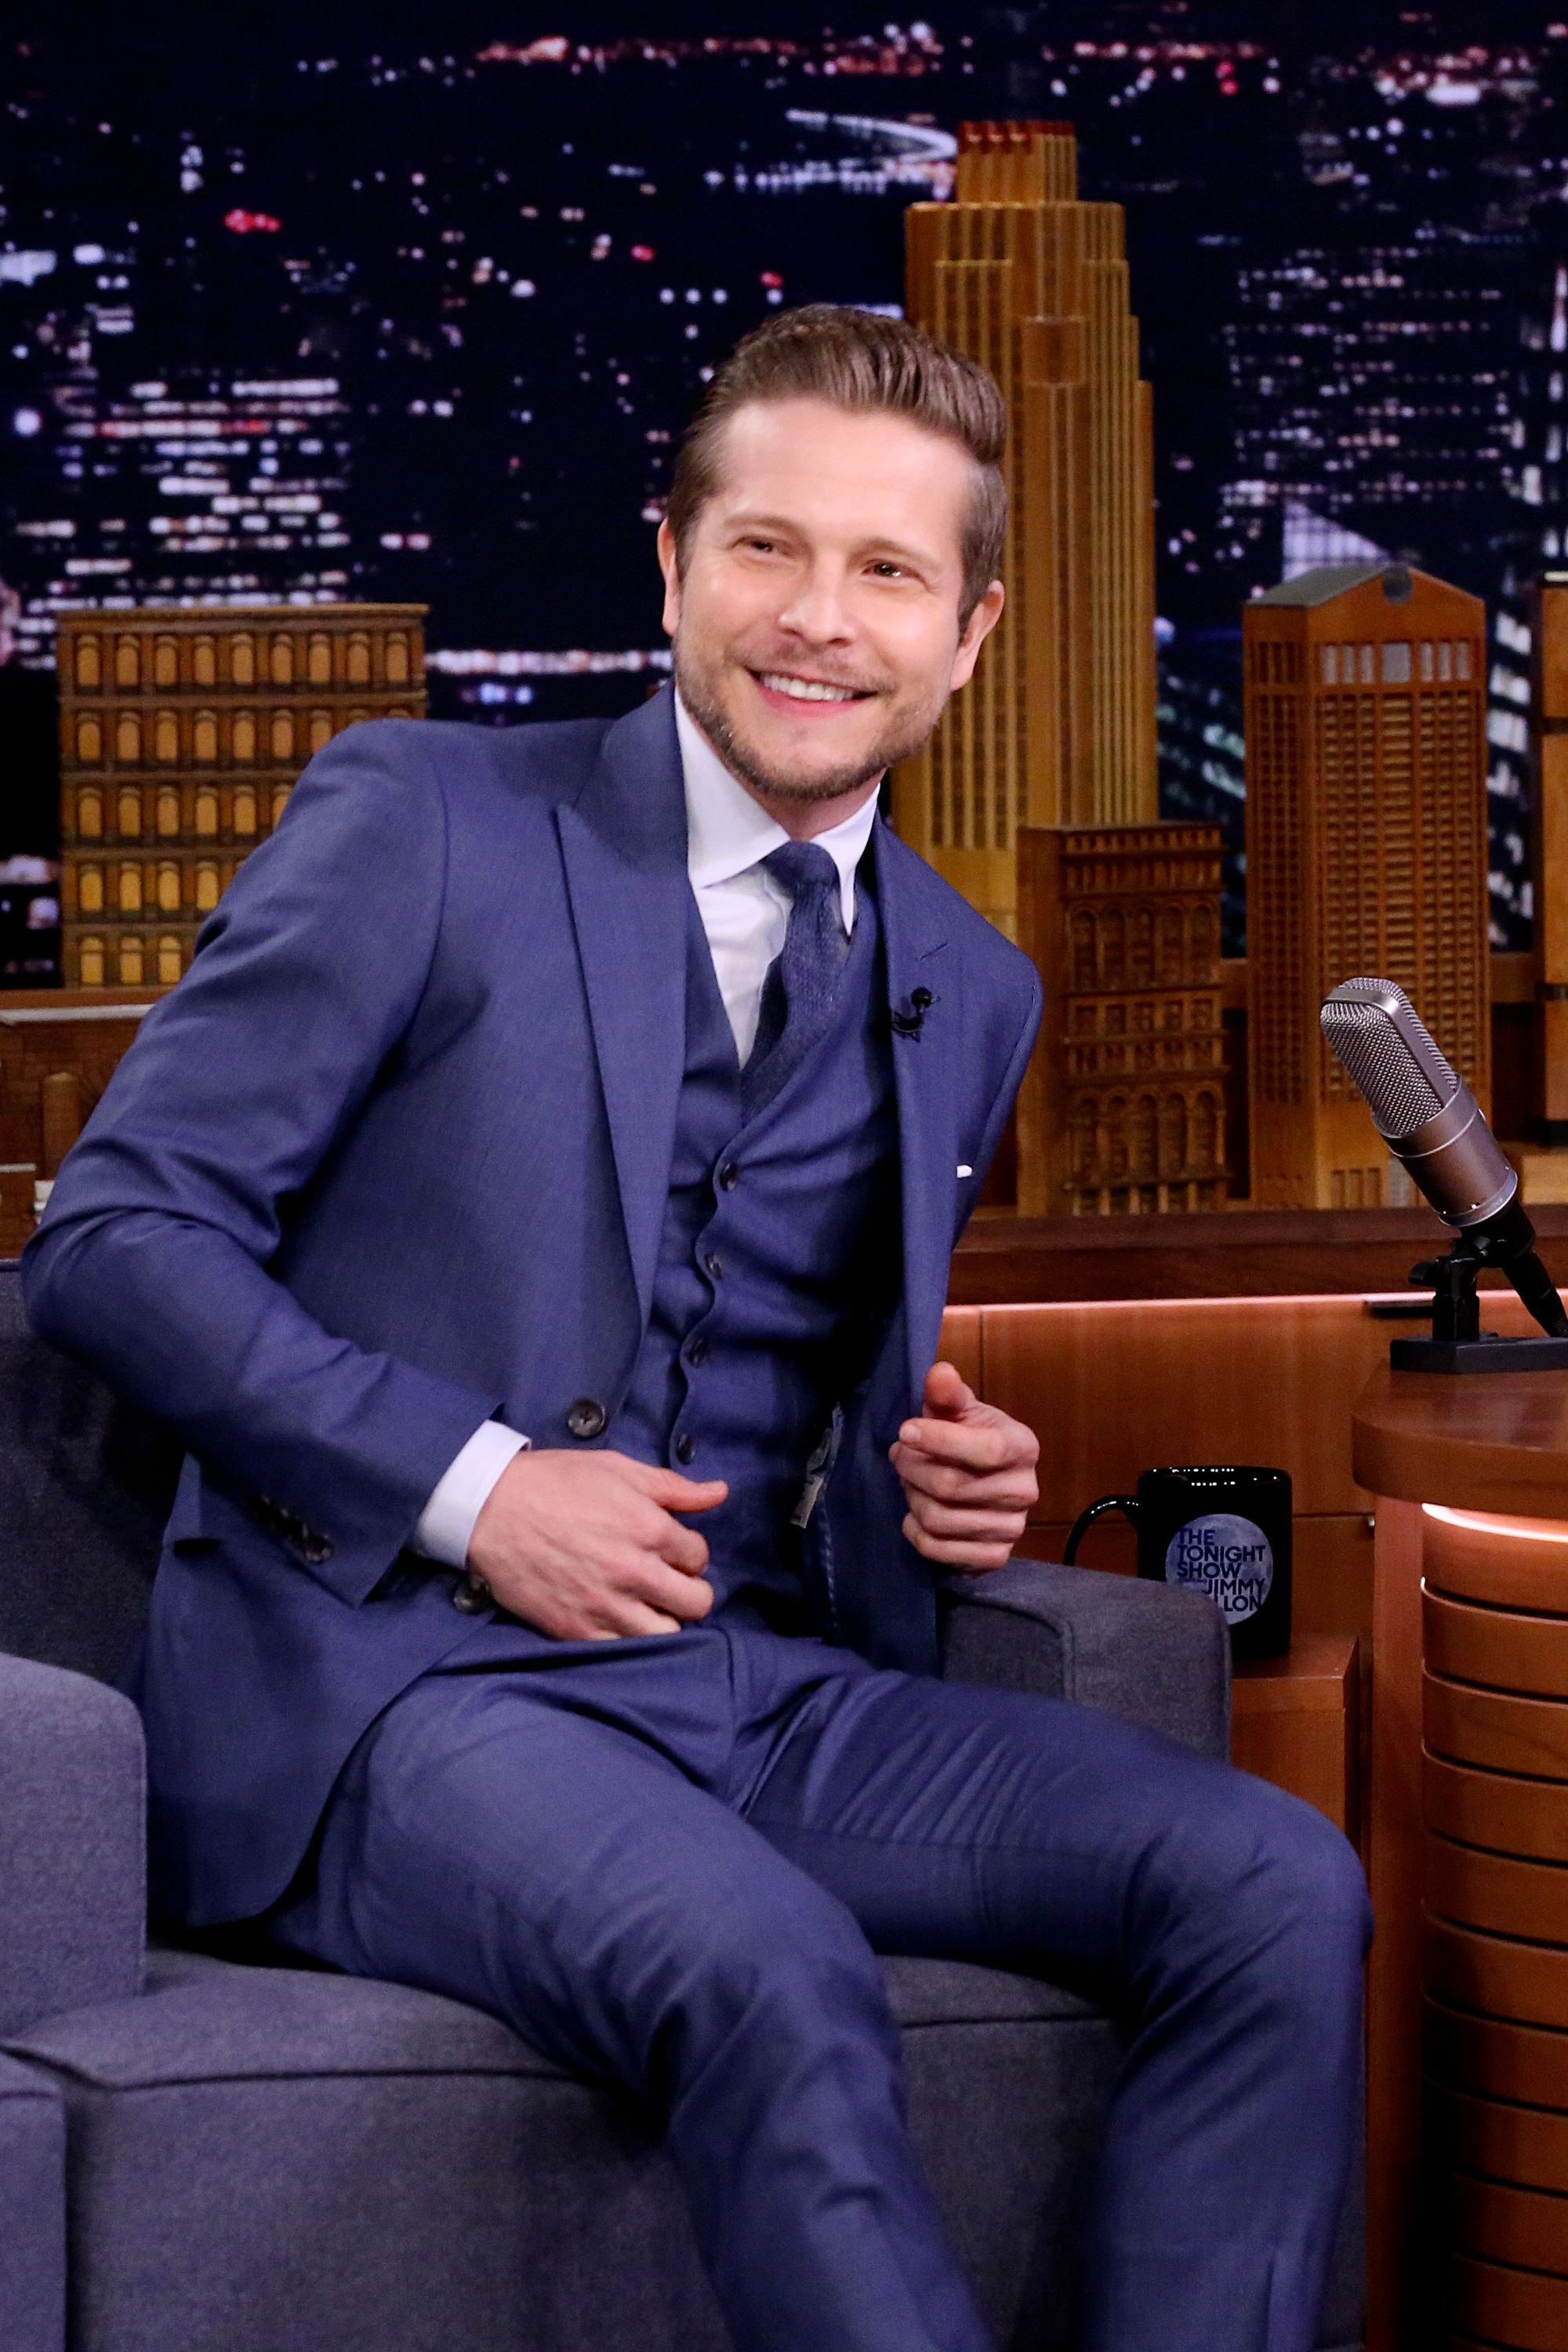 Actor Matt Czuchry during an interview on "The Tonight Show Starring Jimmy Fallon" September 12, 2018. | Photo: Getty Images